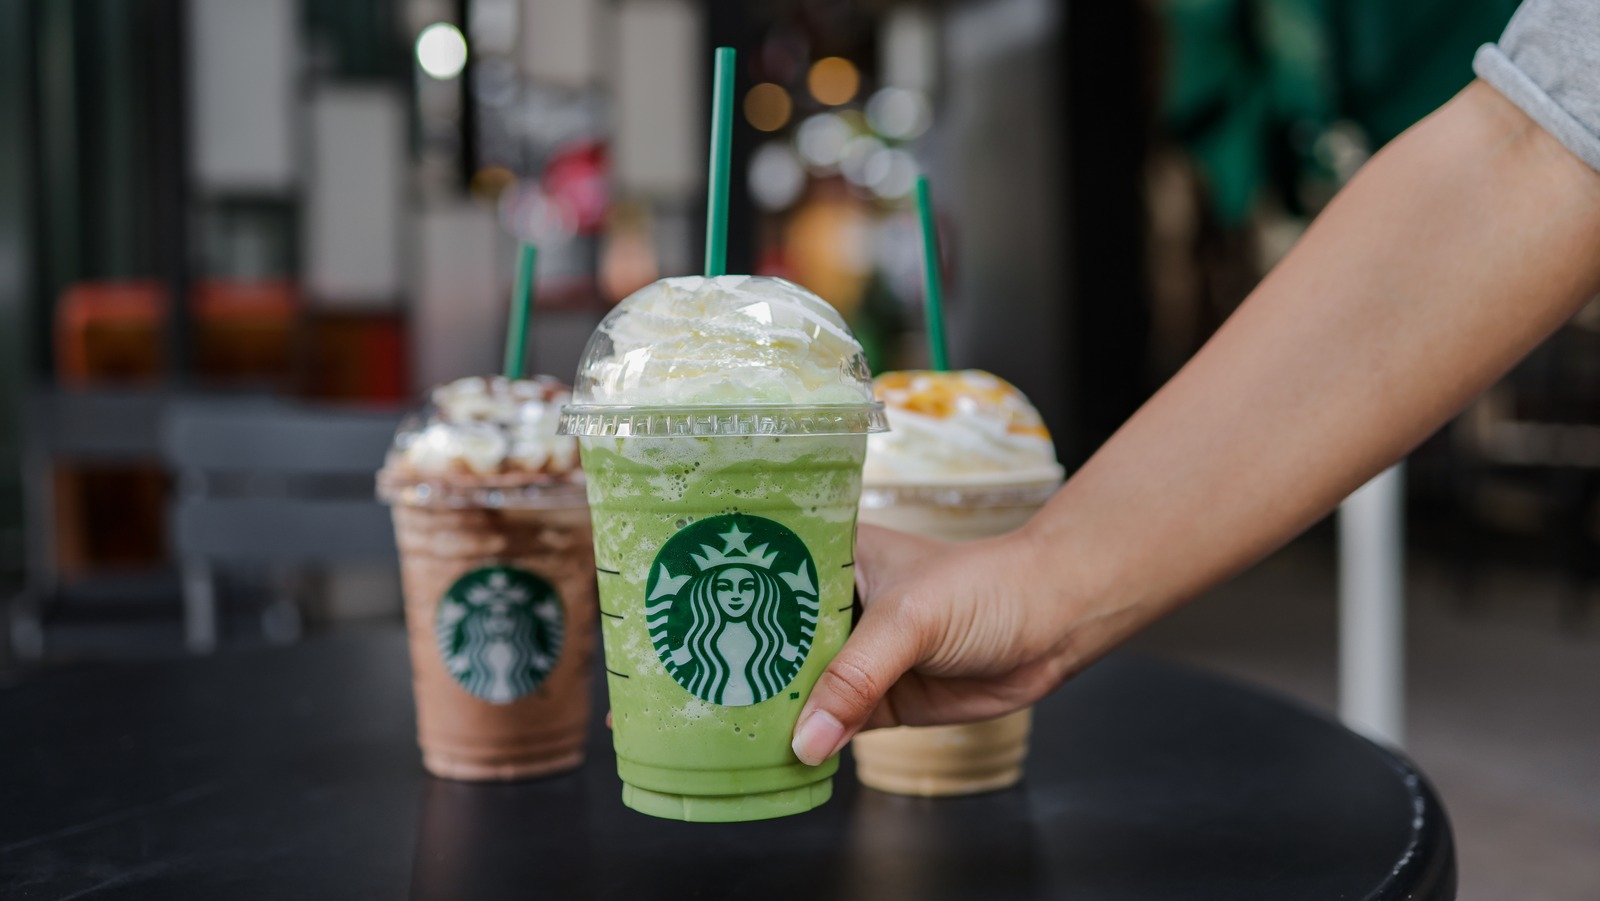 Starbucks' Summer 2023 Menu Has Reportedly Leaked. Here's When To Expect It